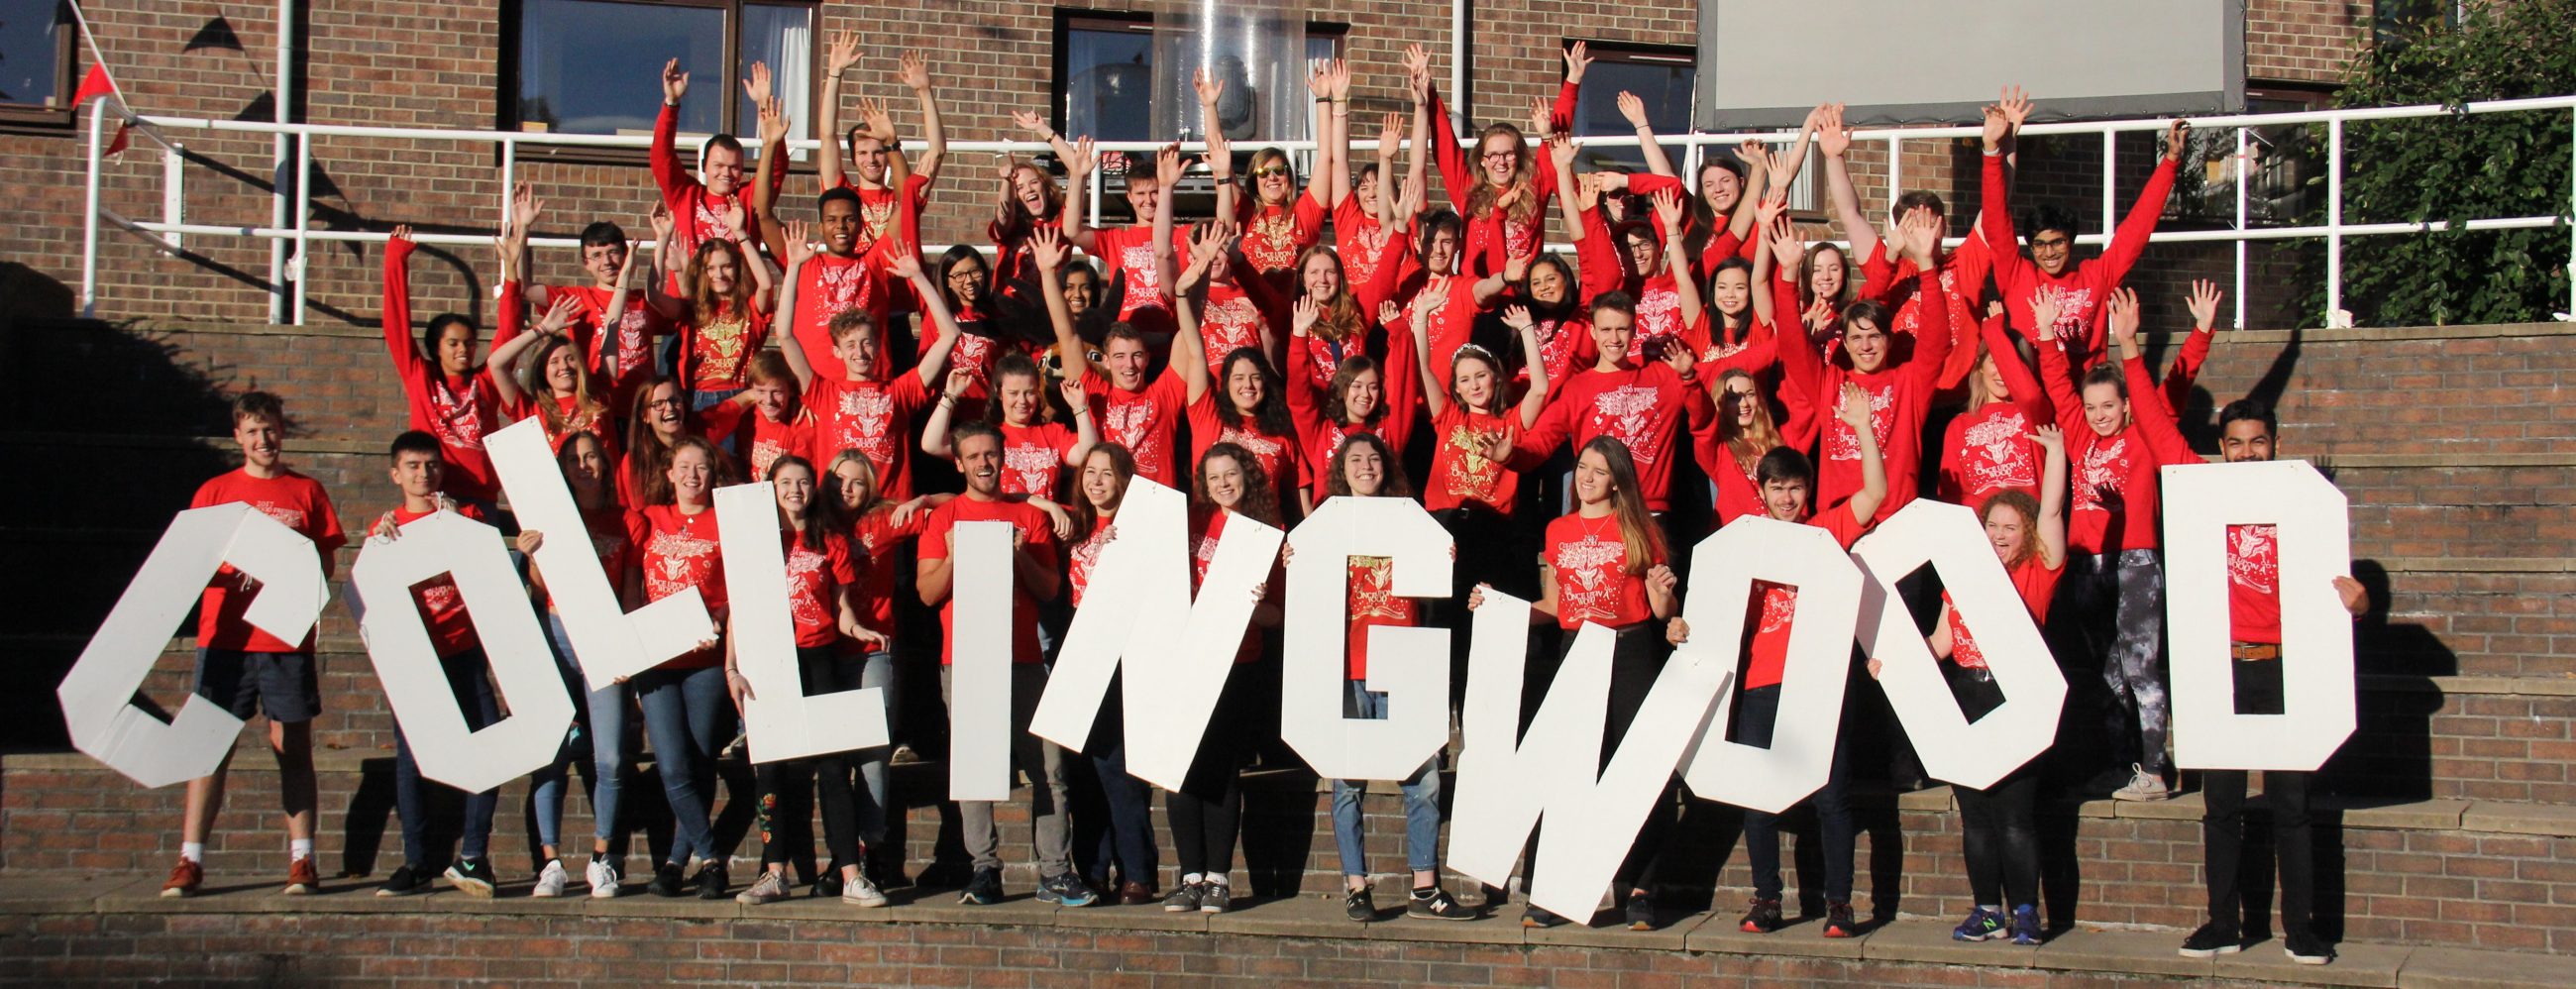 Students in red freshers t-shirts holding Collingwood sign